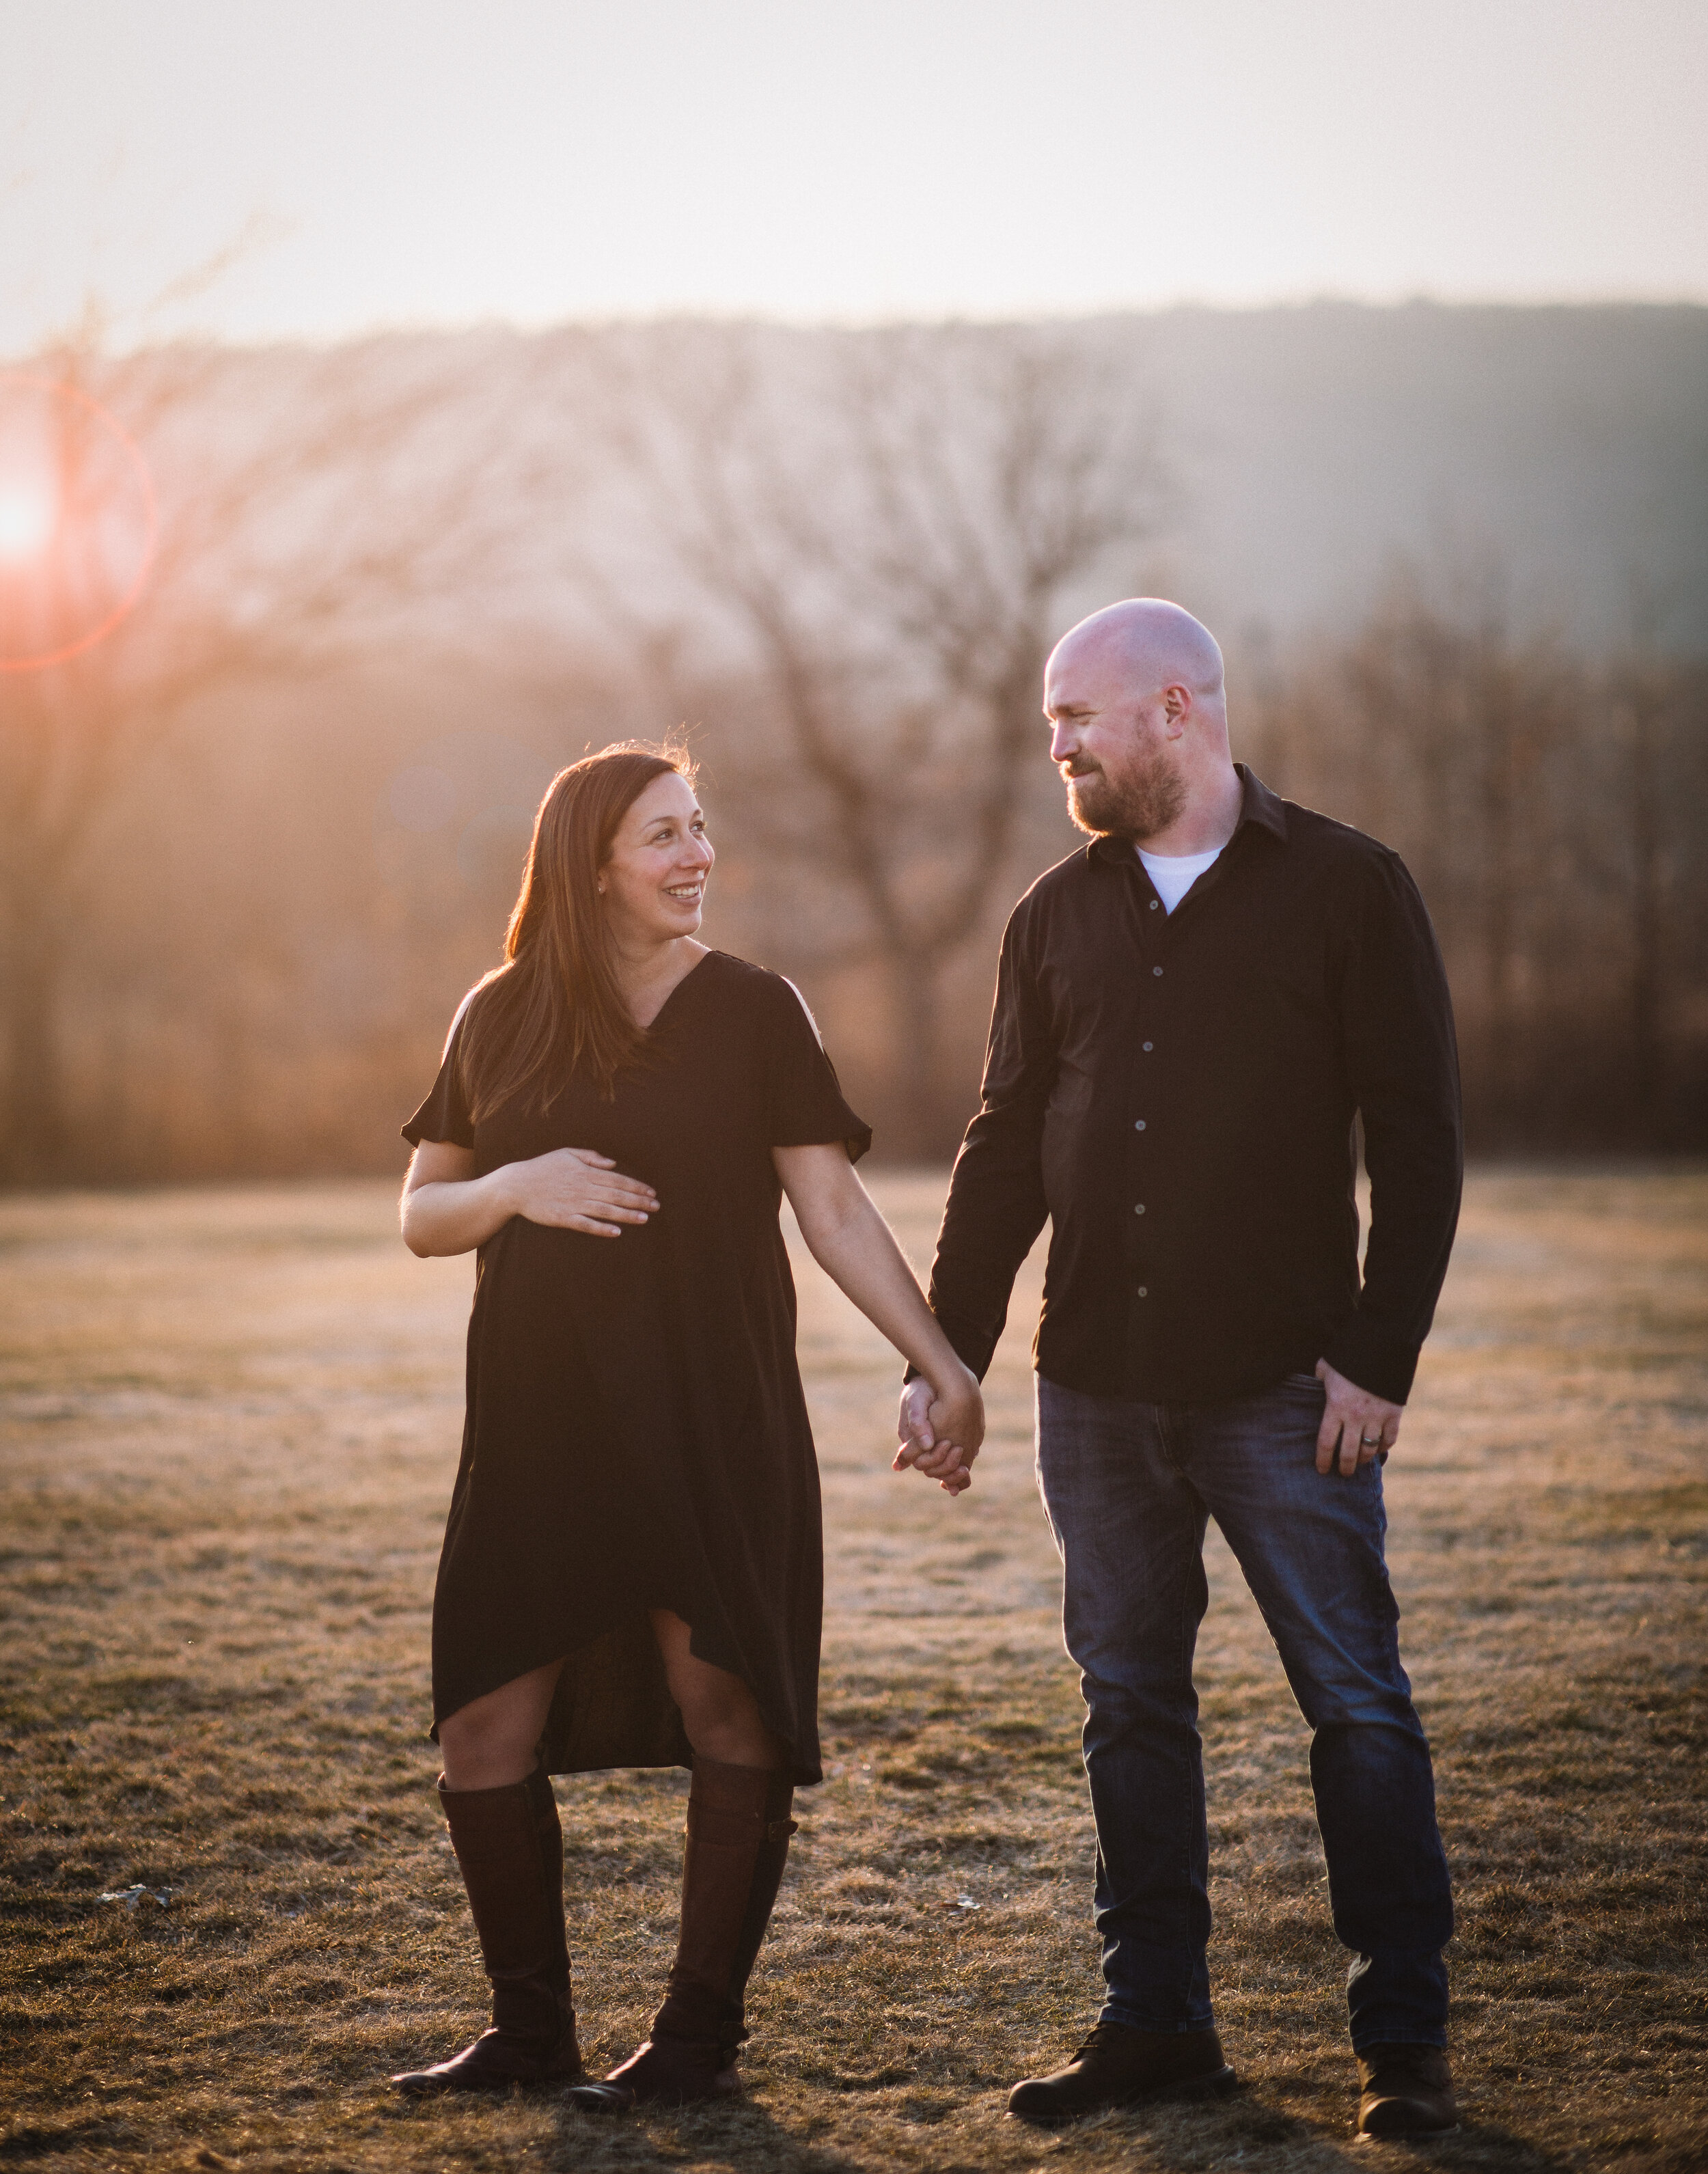  Husband and wife in casual attire holding hands in a sunny field during a maternity photo session 